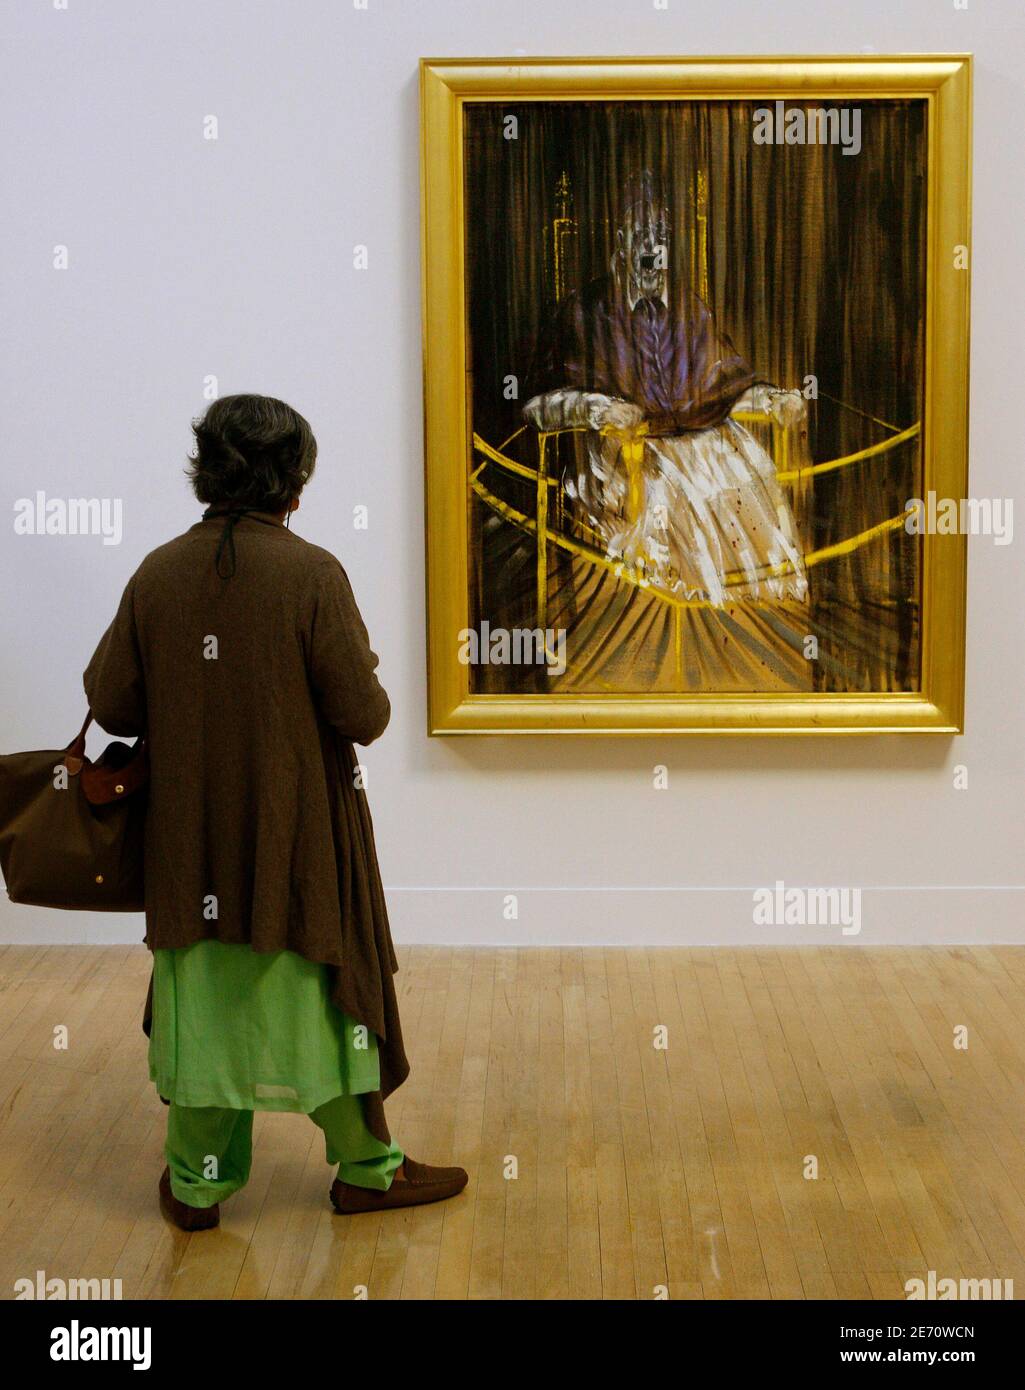 A woman looks at Francis Bacon's "Study after Velazquez's Portrait of Pope  Innocent X" 1953 during a press preview for Tate Britain's exhibition of  the work of Francis Bacon (1909-1992) in London